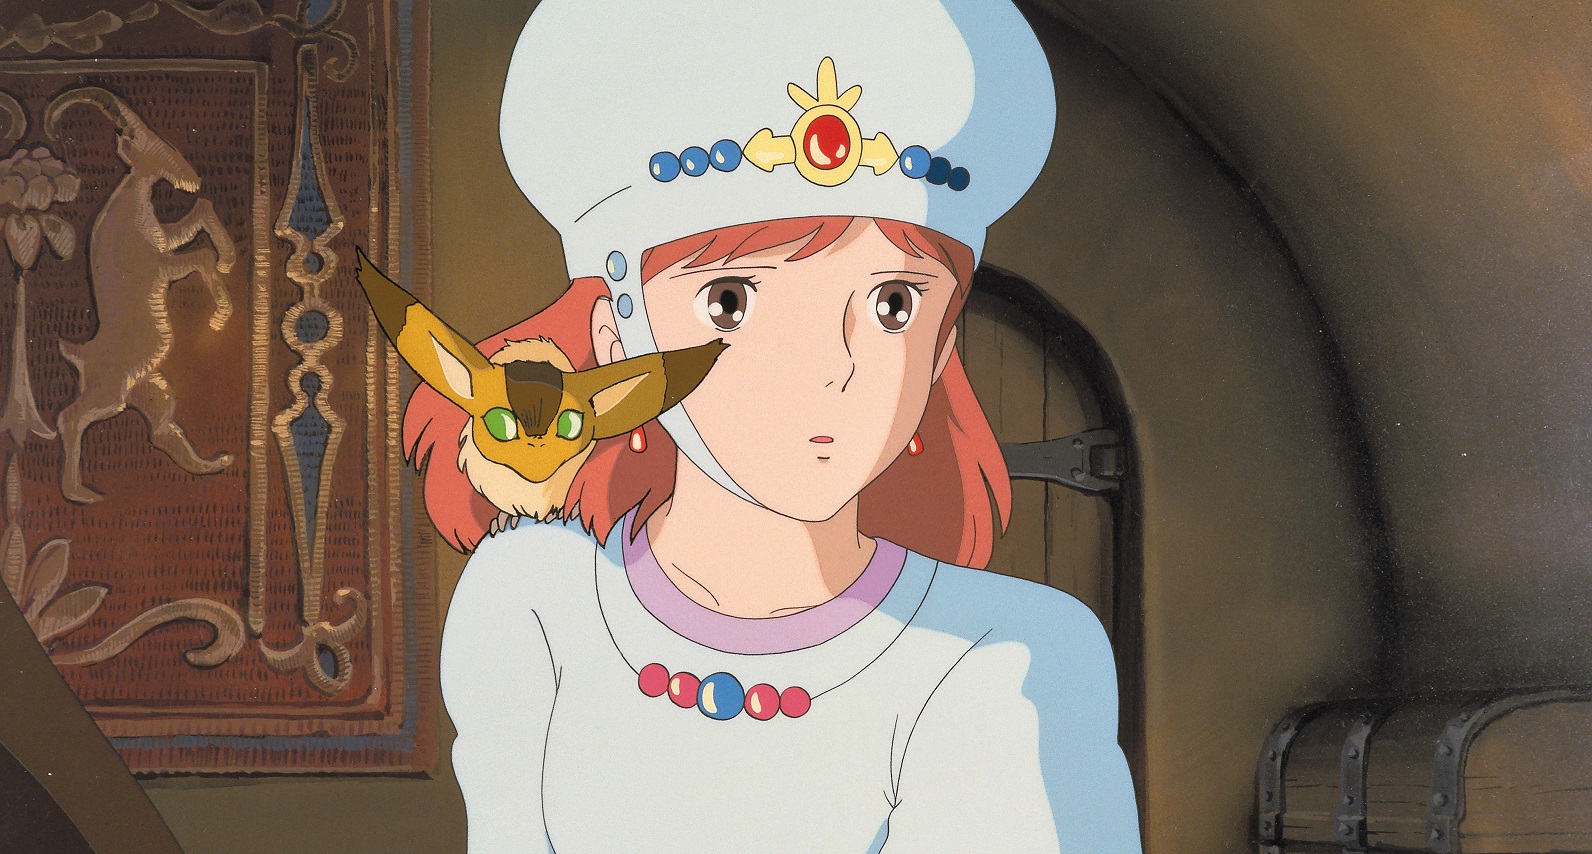 Princess Nausicaä and her fox-squirrel companion Teto share a look of concern in a scene from the 1984 Nausicaä of the Valley of the Wind theatrical film.